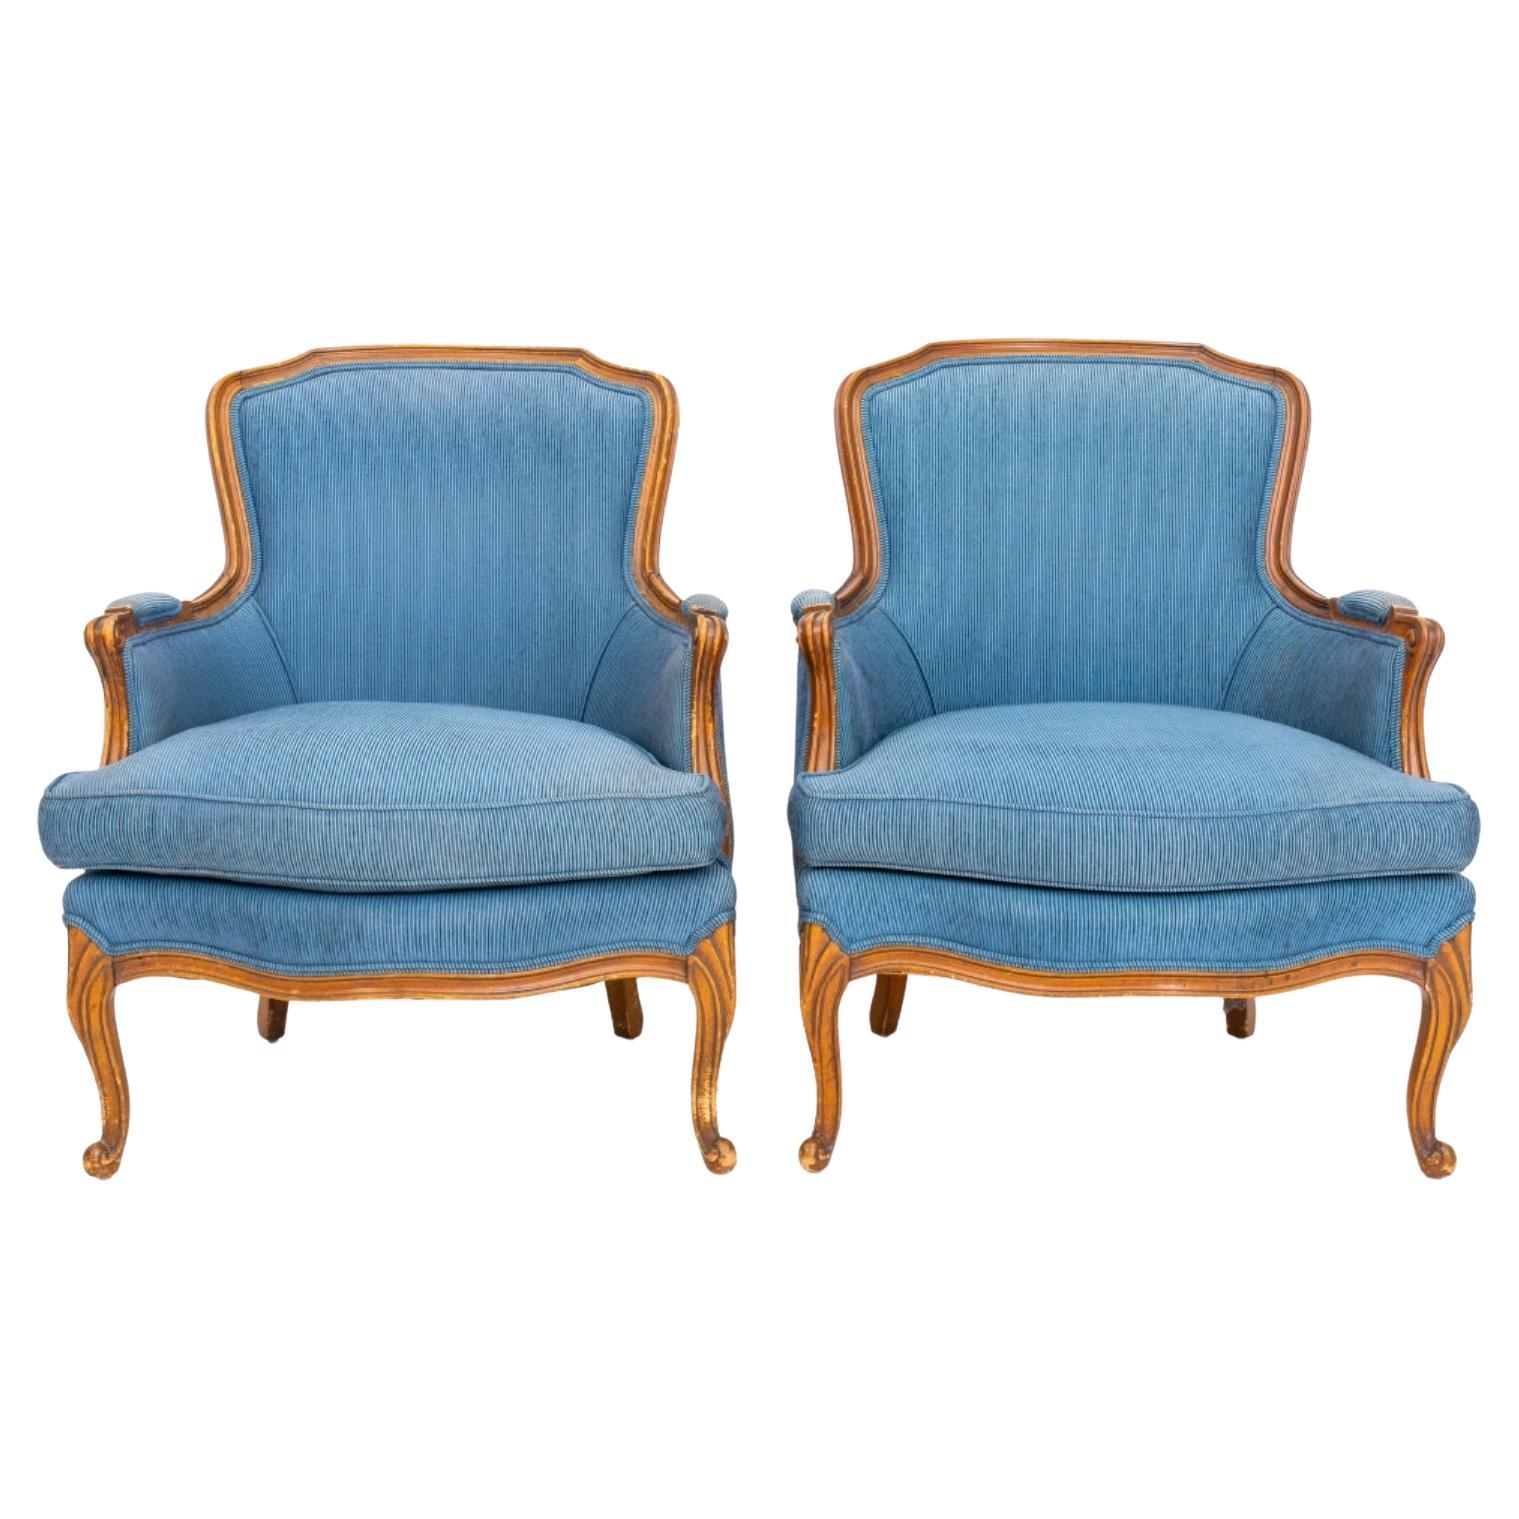 French Provincial Style Upholstered Arm Chairs, Pair